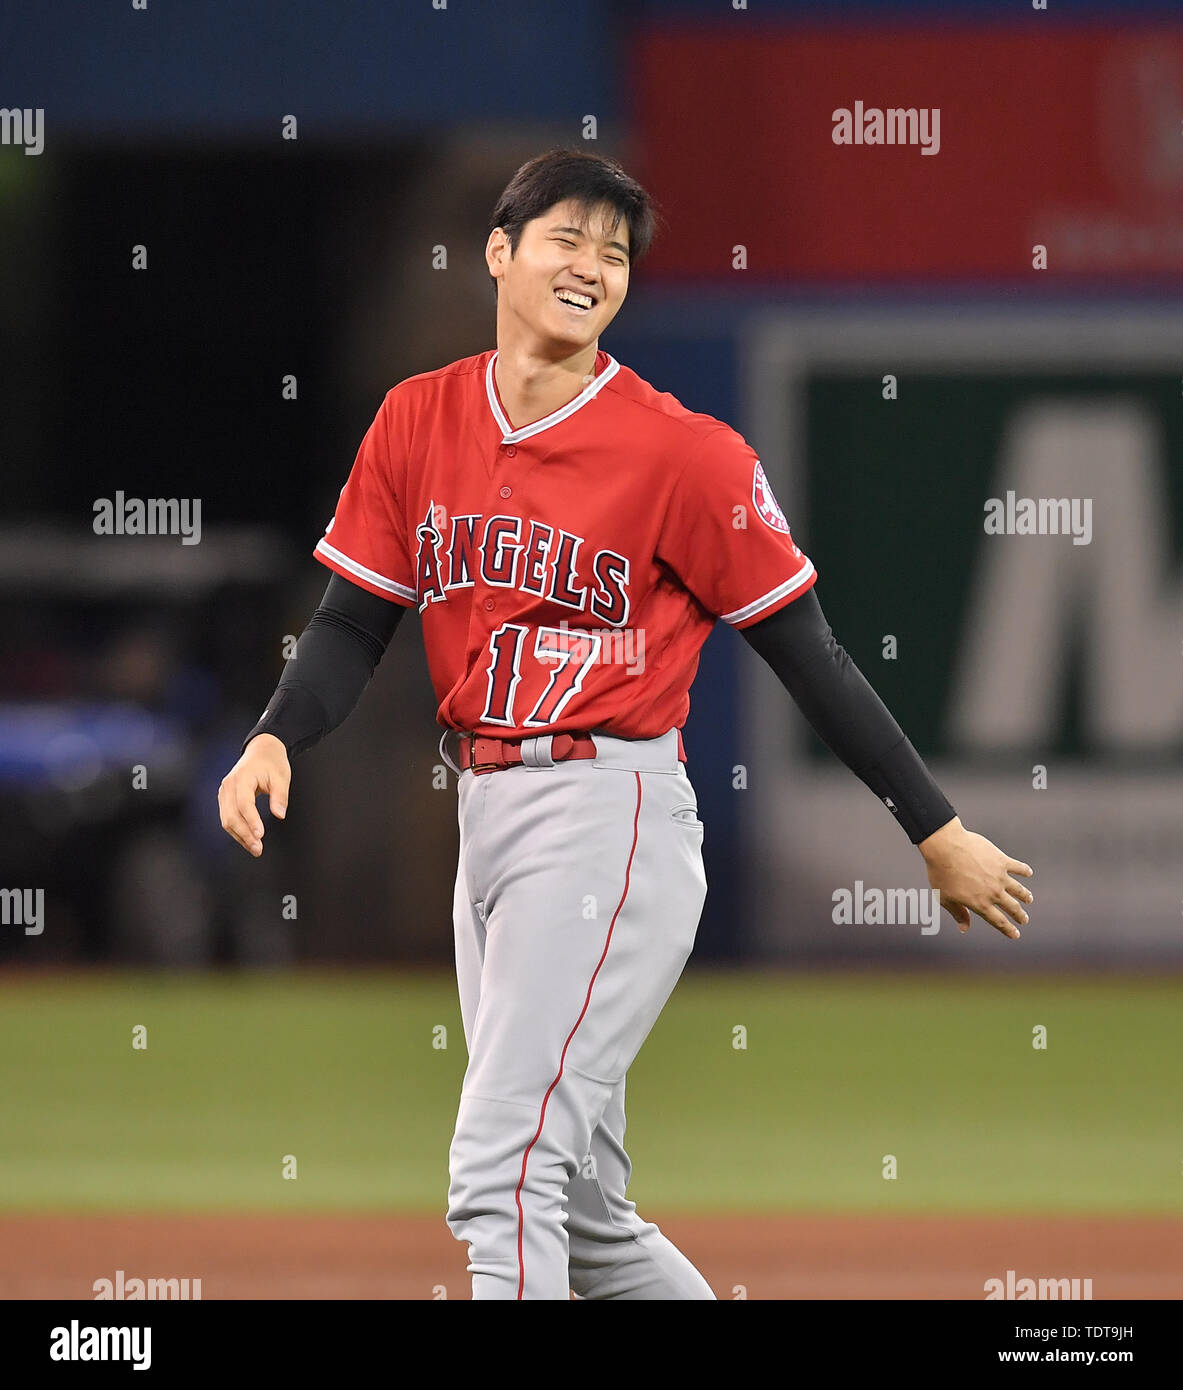 Toronto, Canada. 17th June, 2019. Los Angeles Angels' Shohei Ohtani celebrates after winning the Major League Baseball game against the Toronto Blue Jays at Rogers Centre in Toronto, Canada, June 17, 2019. Credit: AFLO/Alamy Live News Stock Photo